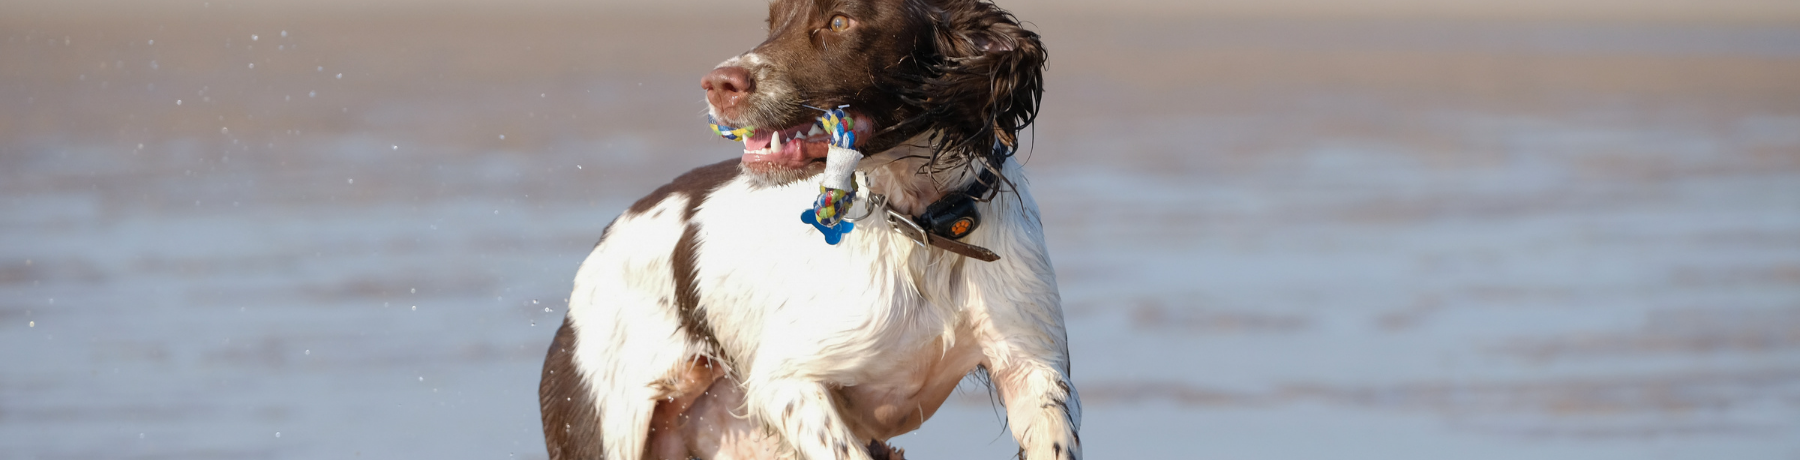 EXERCISING YOUR DOG IN THE HEAT: OUR TOP TIPS image